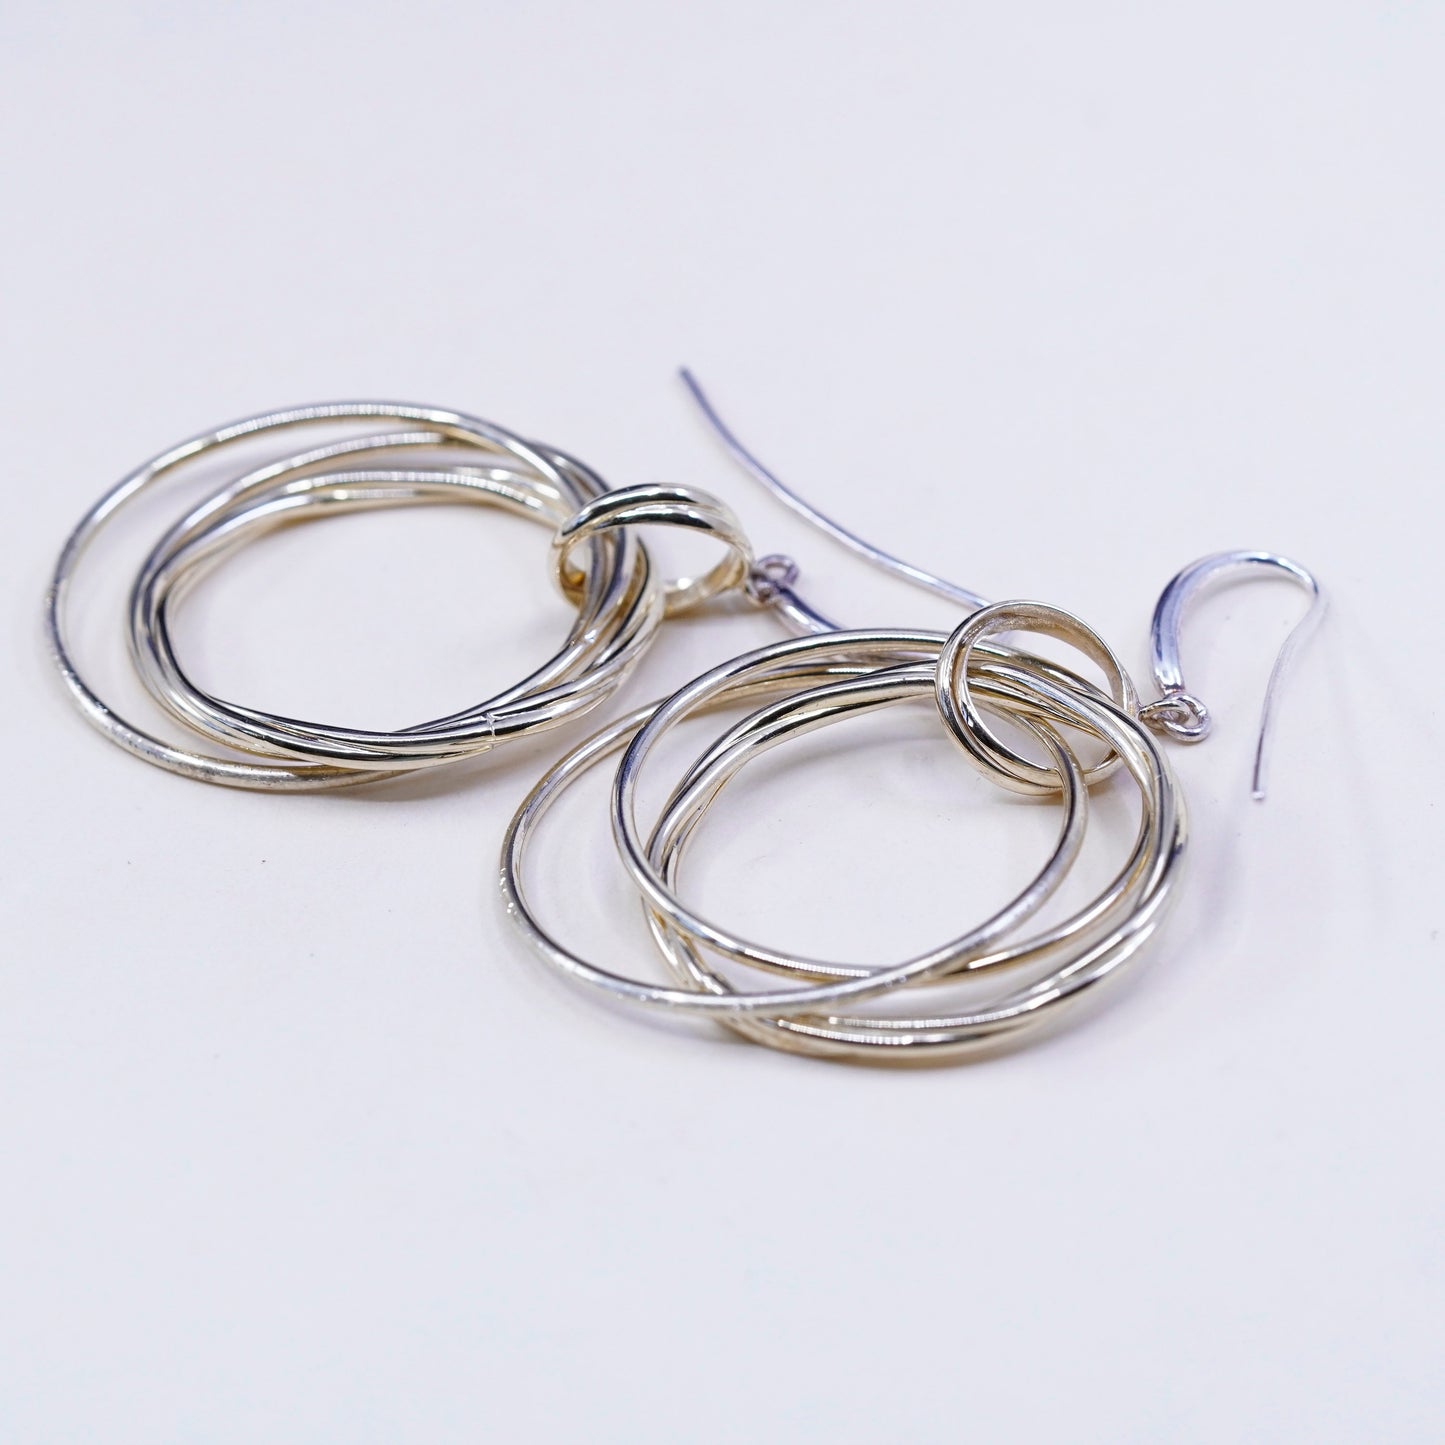 Vintage two tone sterling 925 silver drop earrings with entwined circle